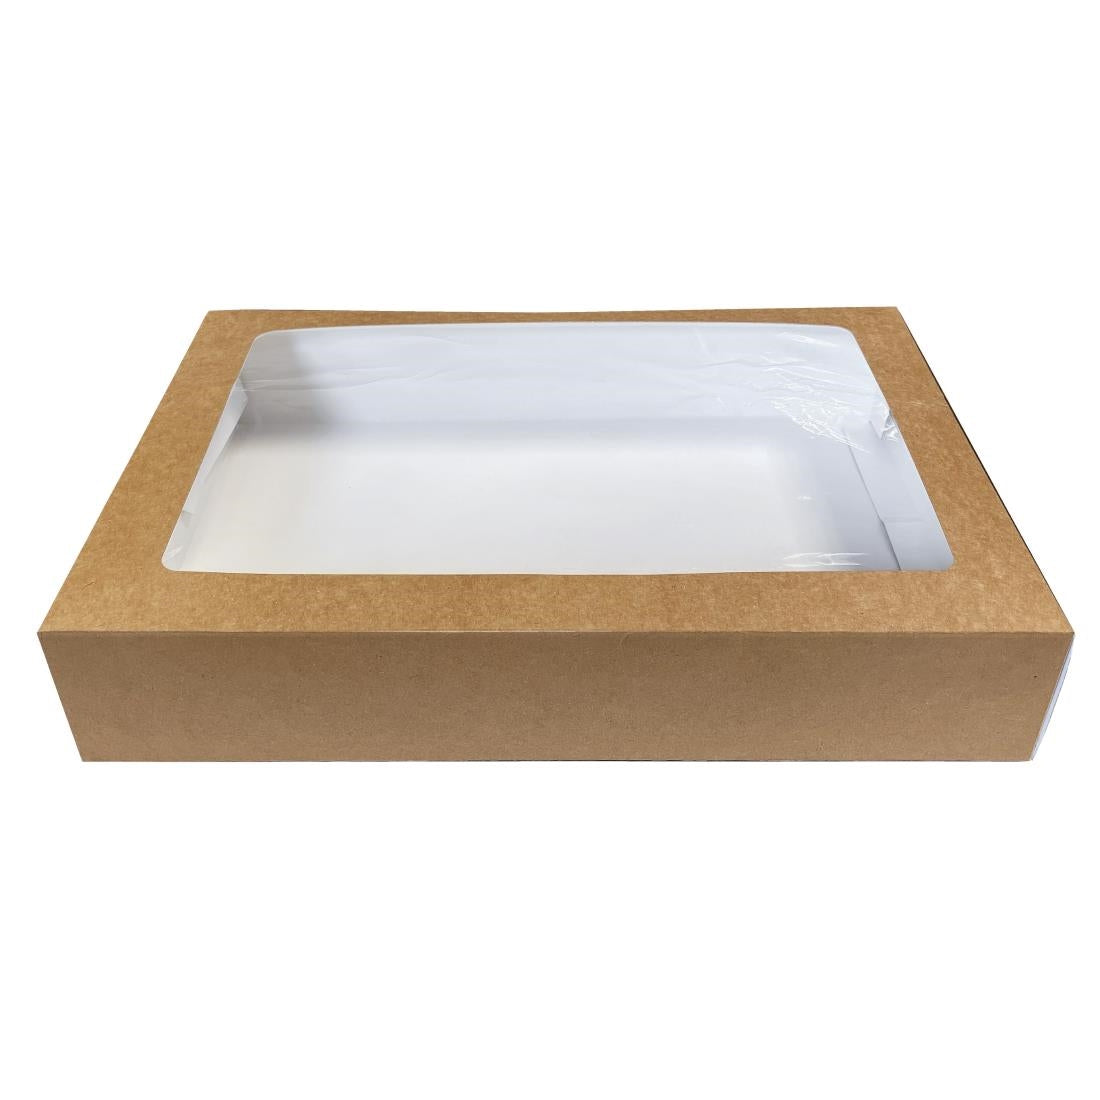 FT673 Fiesta Recyclable Platter Box with PET Window Large (Pack of 25) JD Catering Equipment Solutions Ltd